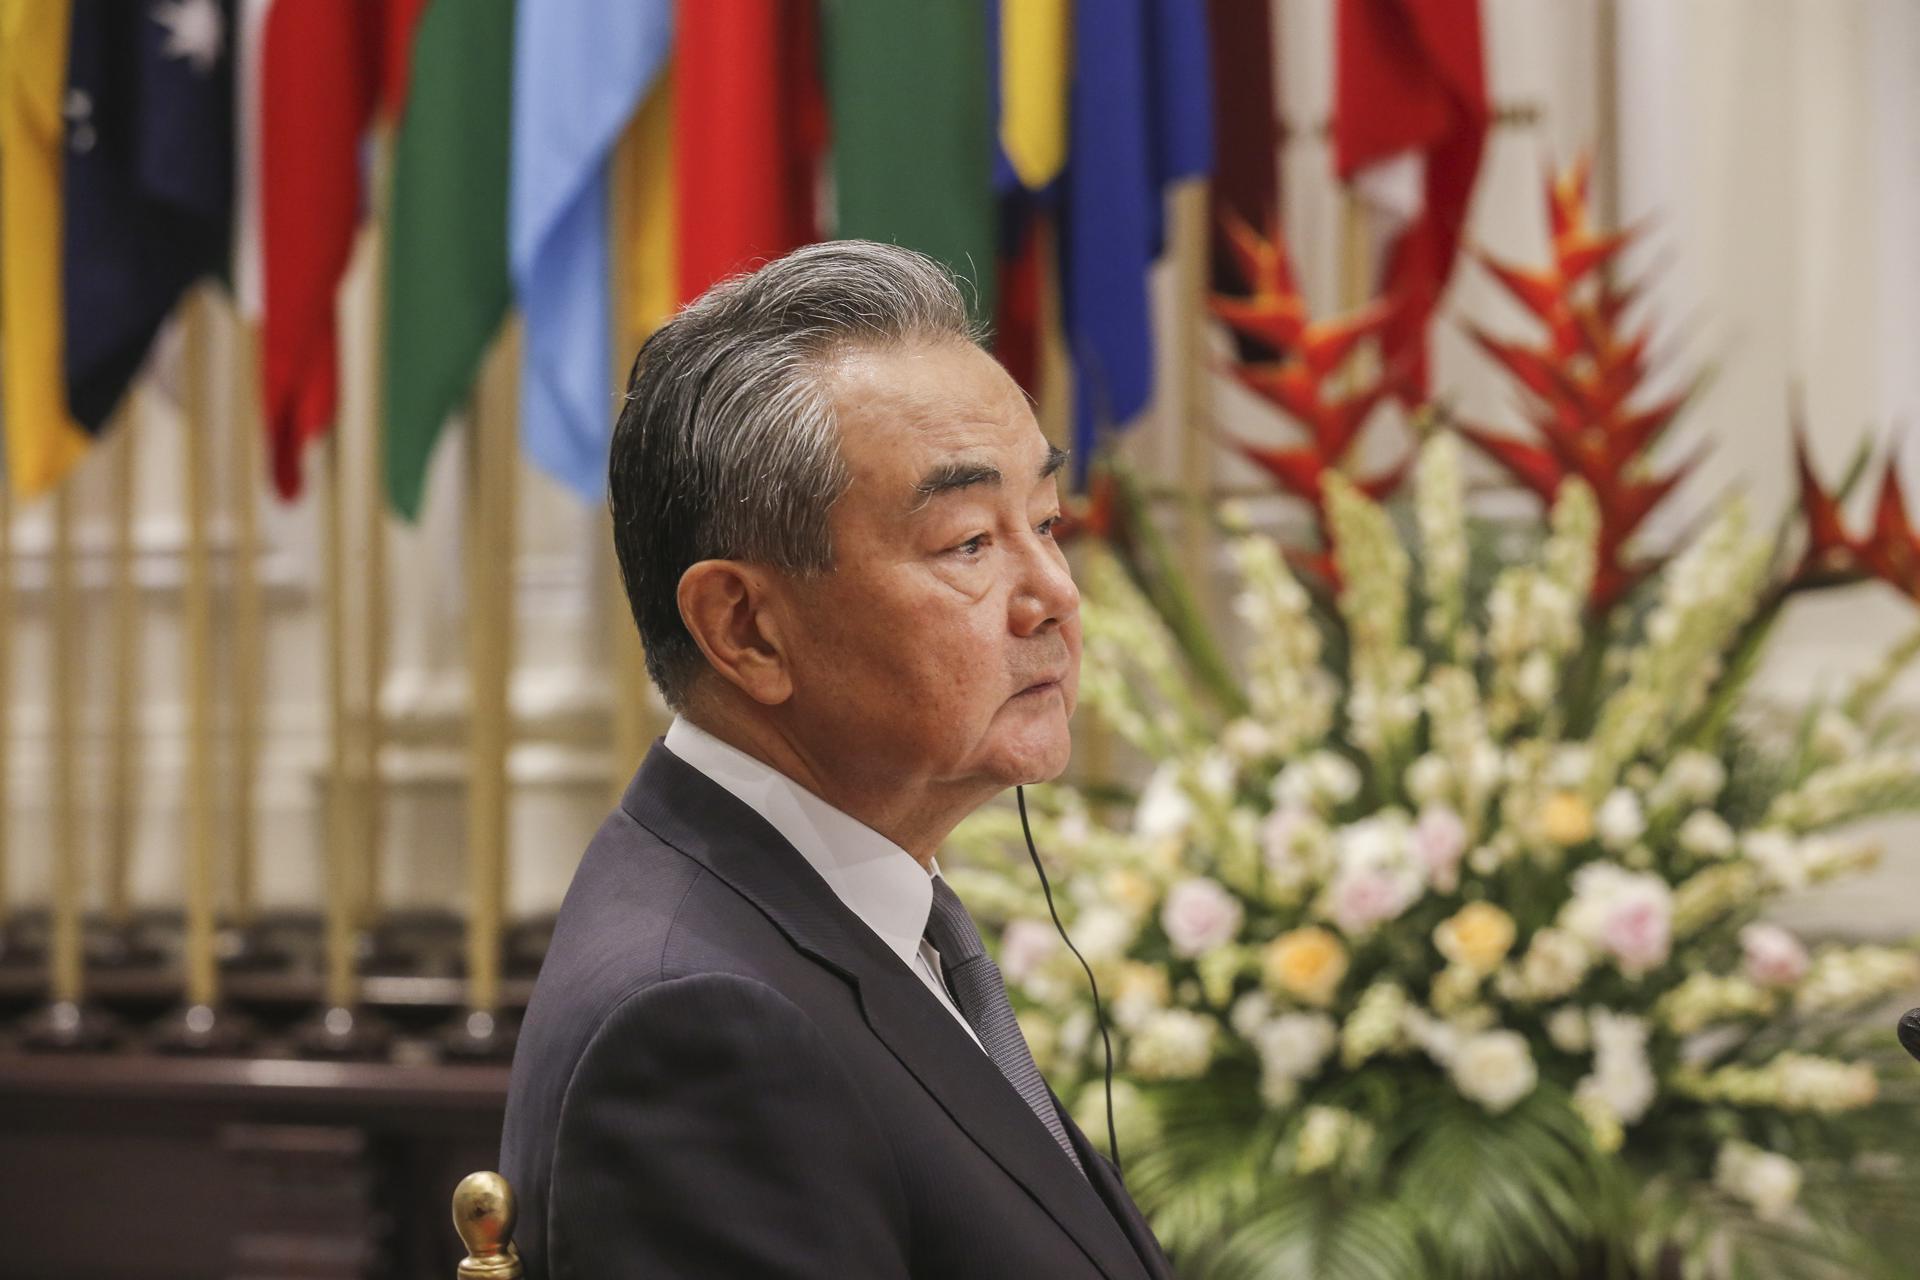 Director of the Office of the Foreign Affairs Commission of the Communist Party of China (CPC) Central Committee, Wang Yi attends a trilateral meeting between Indonesia, Russia and China on the sideline of the Association of Southeast Asian Nations (ASEAN) Foreign Ministers'Äô Meeting in Jakarta, Indonesia, 12 July 2023. Indonesia is hosting the 56th ASEAN foreign ministers'Äô meeting and related meetings on 08 to 14 July. (Rusia) EFE/EPA/BAGUS INDAHONO